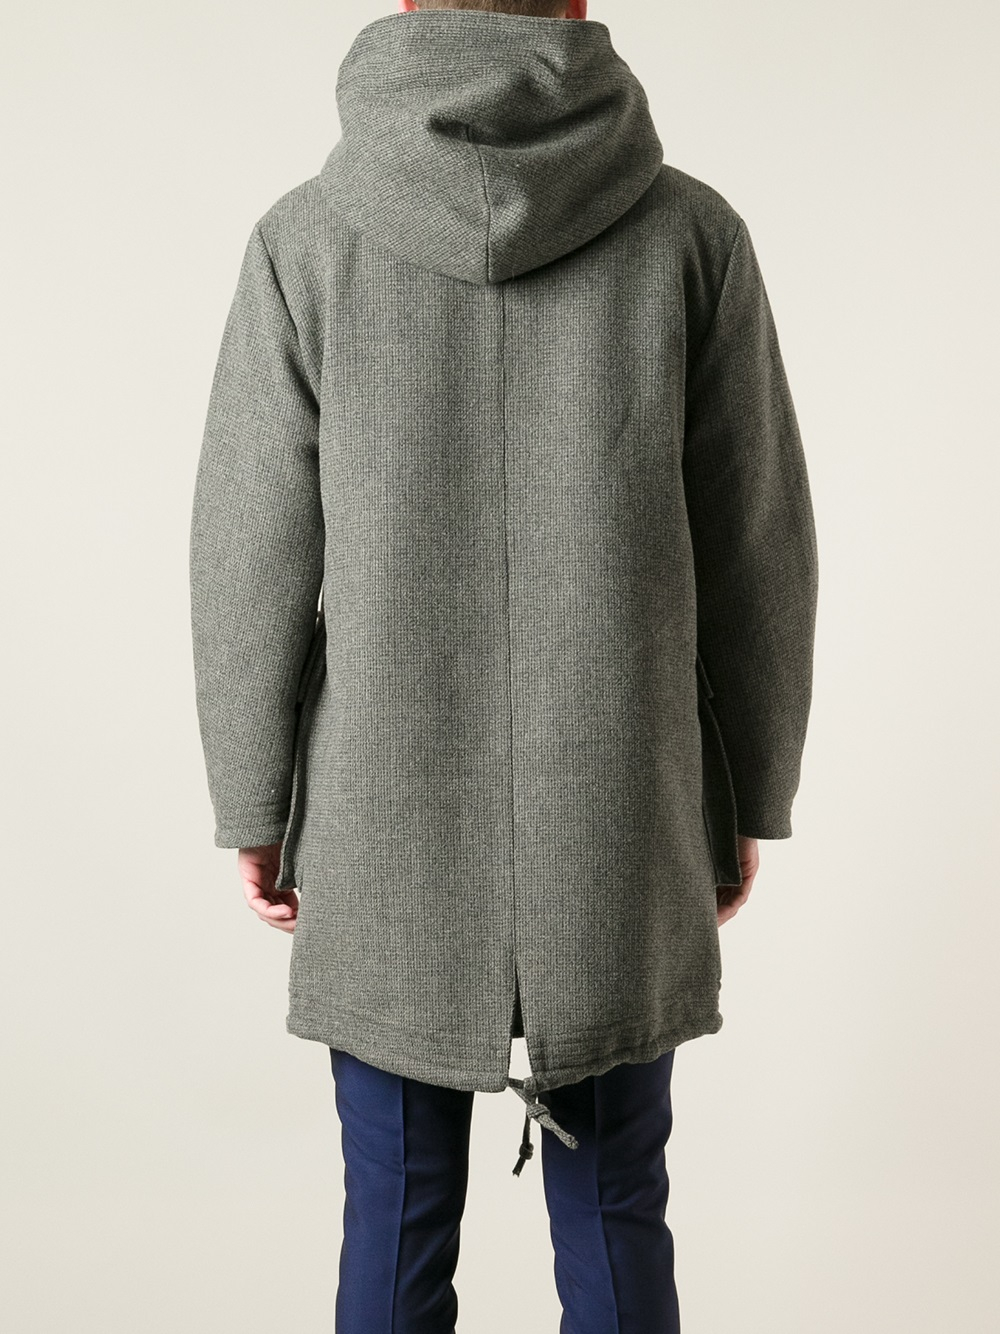 Lyst - Harnold Brook Fine Knit Parka Coat in Gray for Men